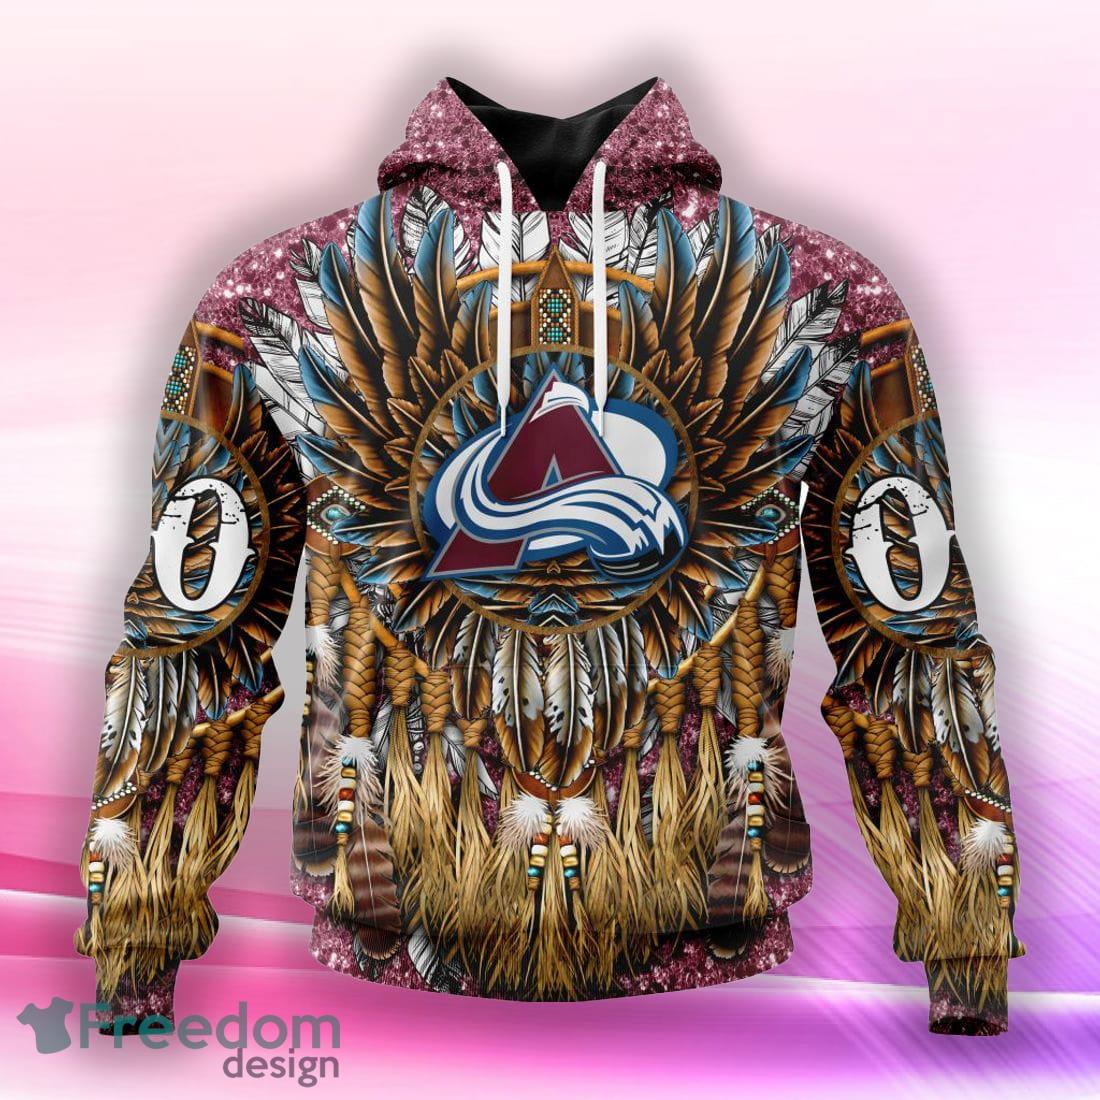 NHL Colorado Avalanche 3D Hoodie Zip Hoodie For Colorado Avalanche Fans